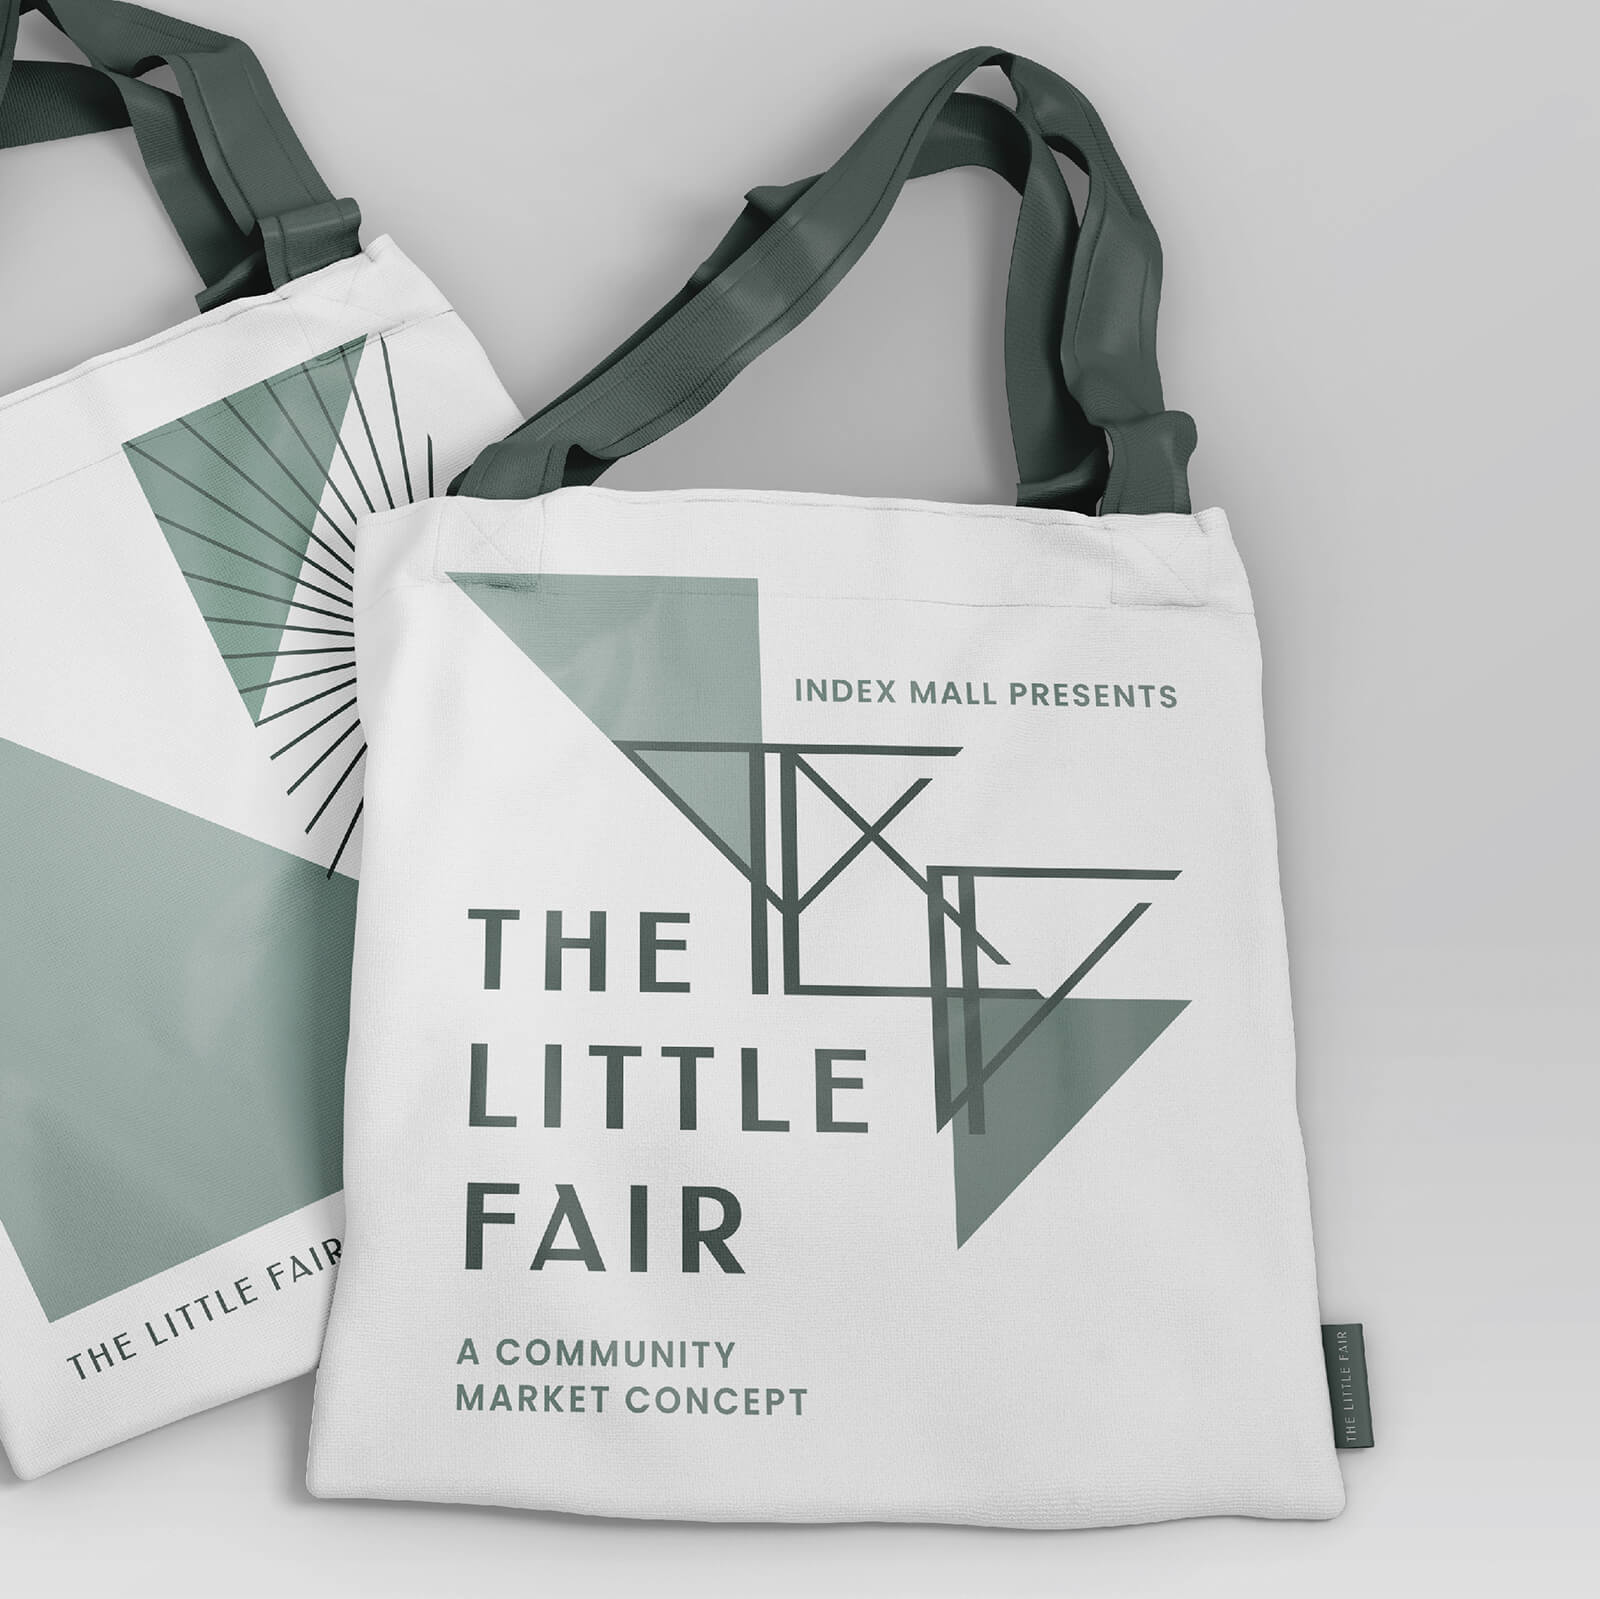 The Little Fair Stationery and Branding